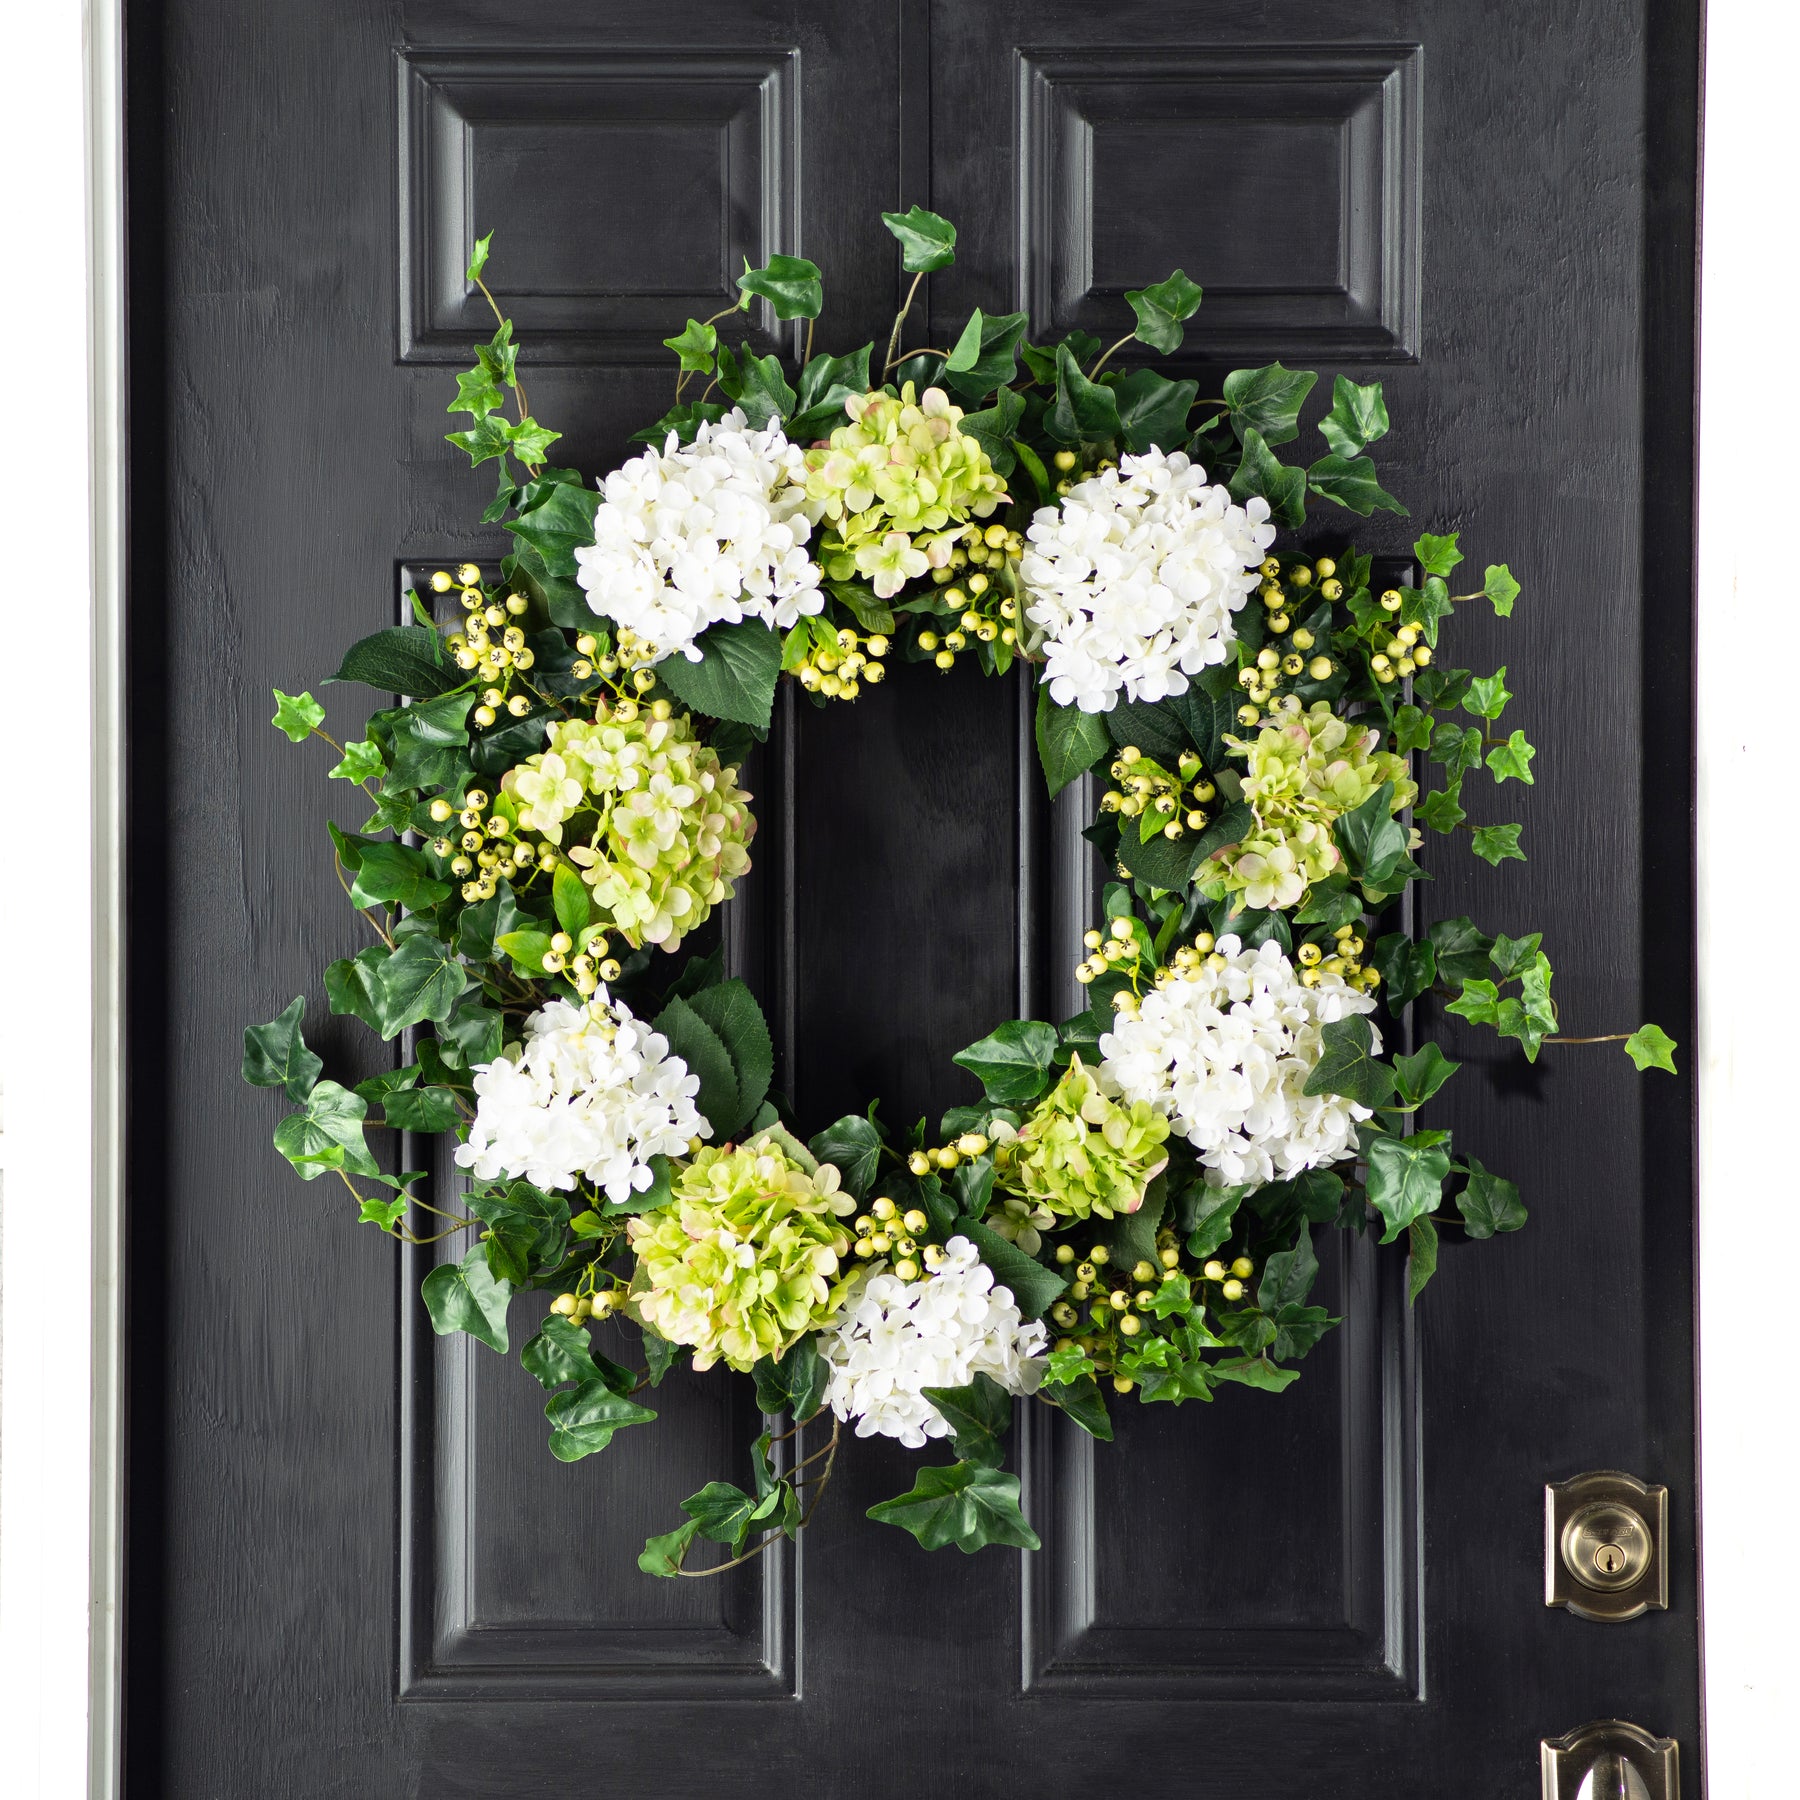 How to Make An Asymmetrical Spring Wreath For Front Door - Open